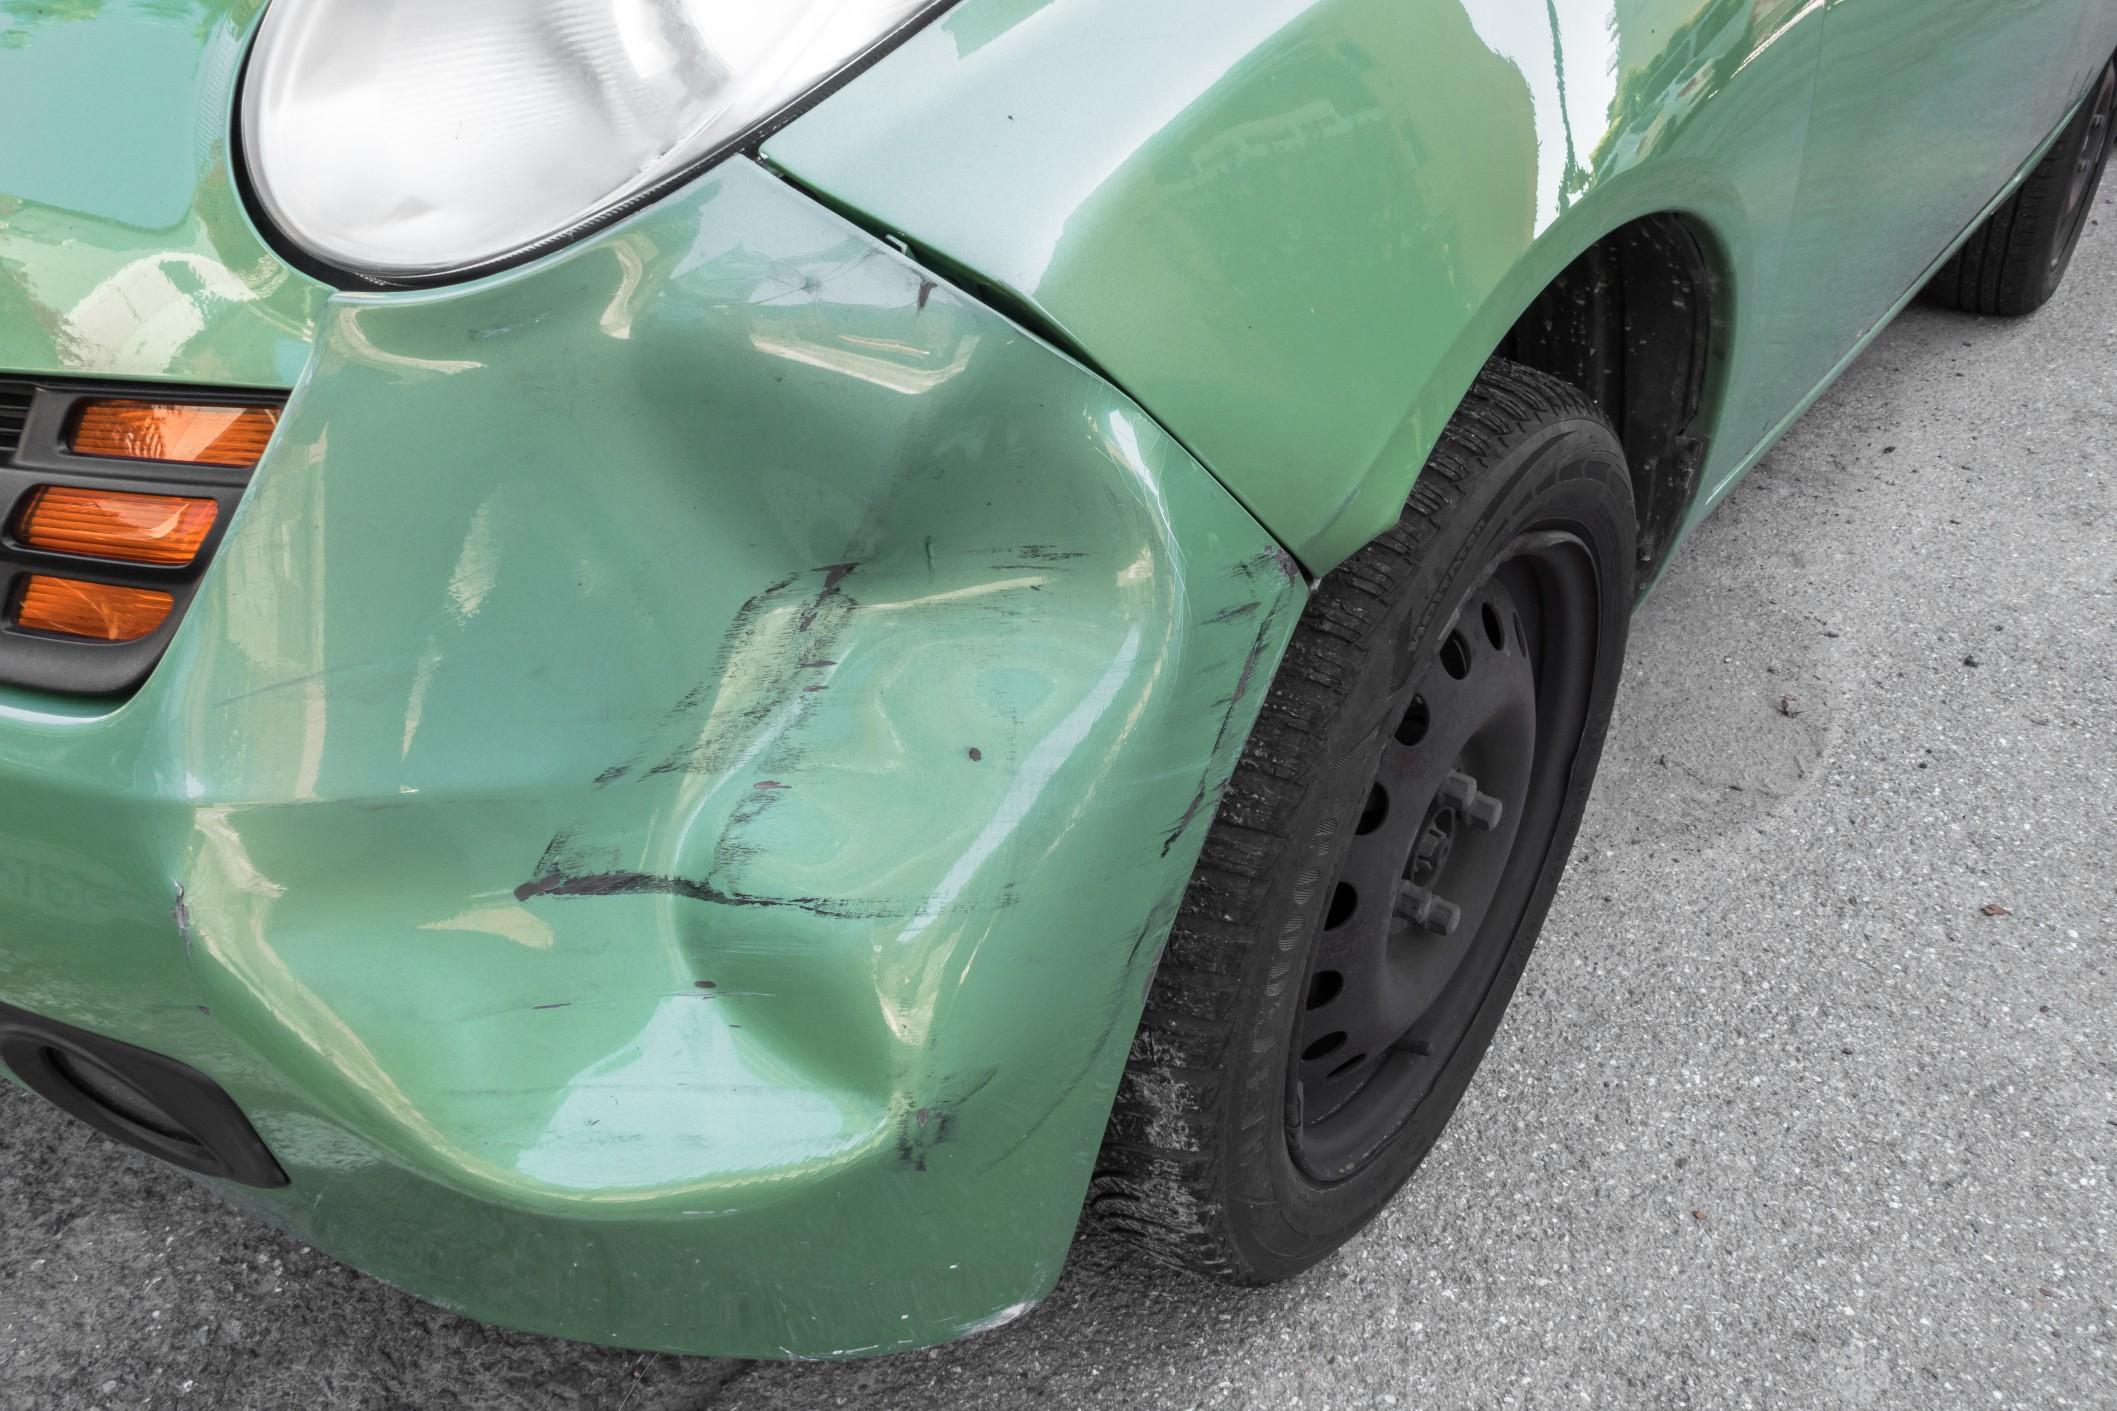 If you get a dent in your car, it might be best to let the professionals handle it.